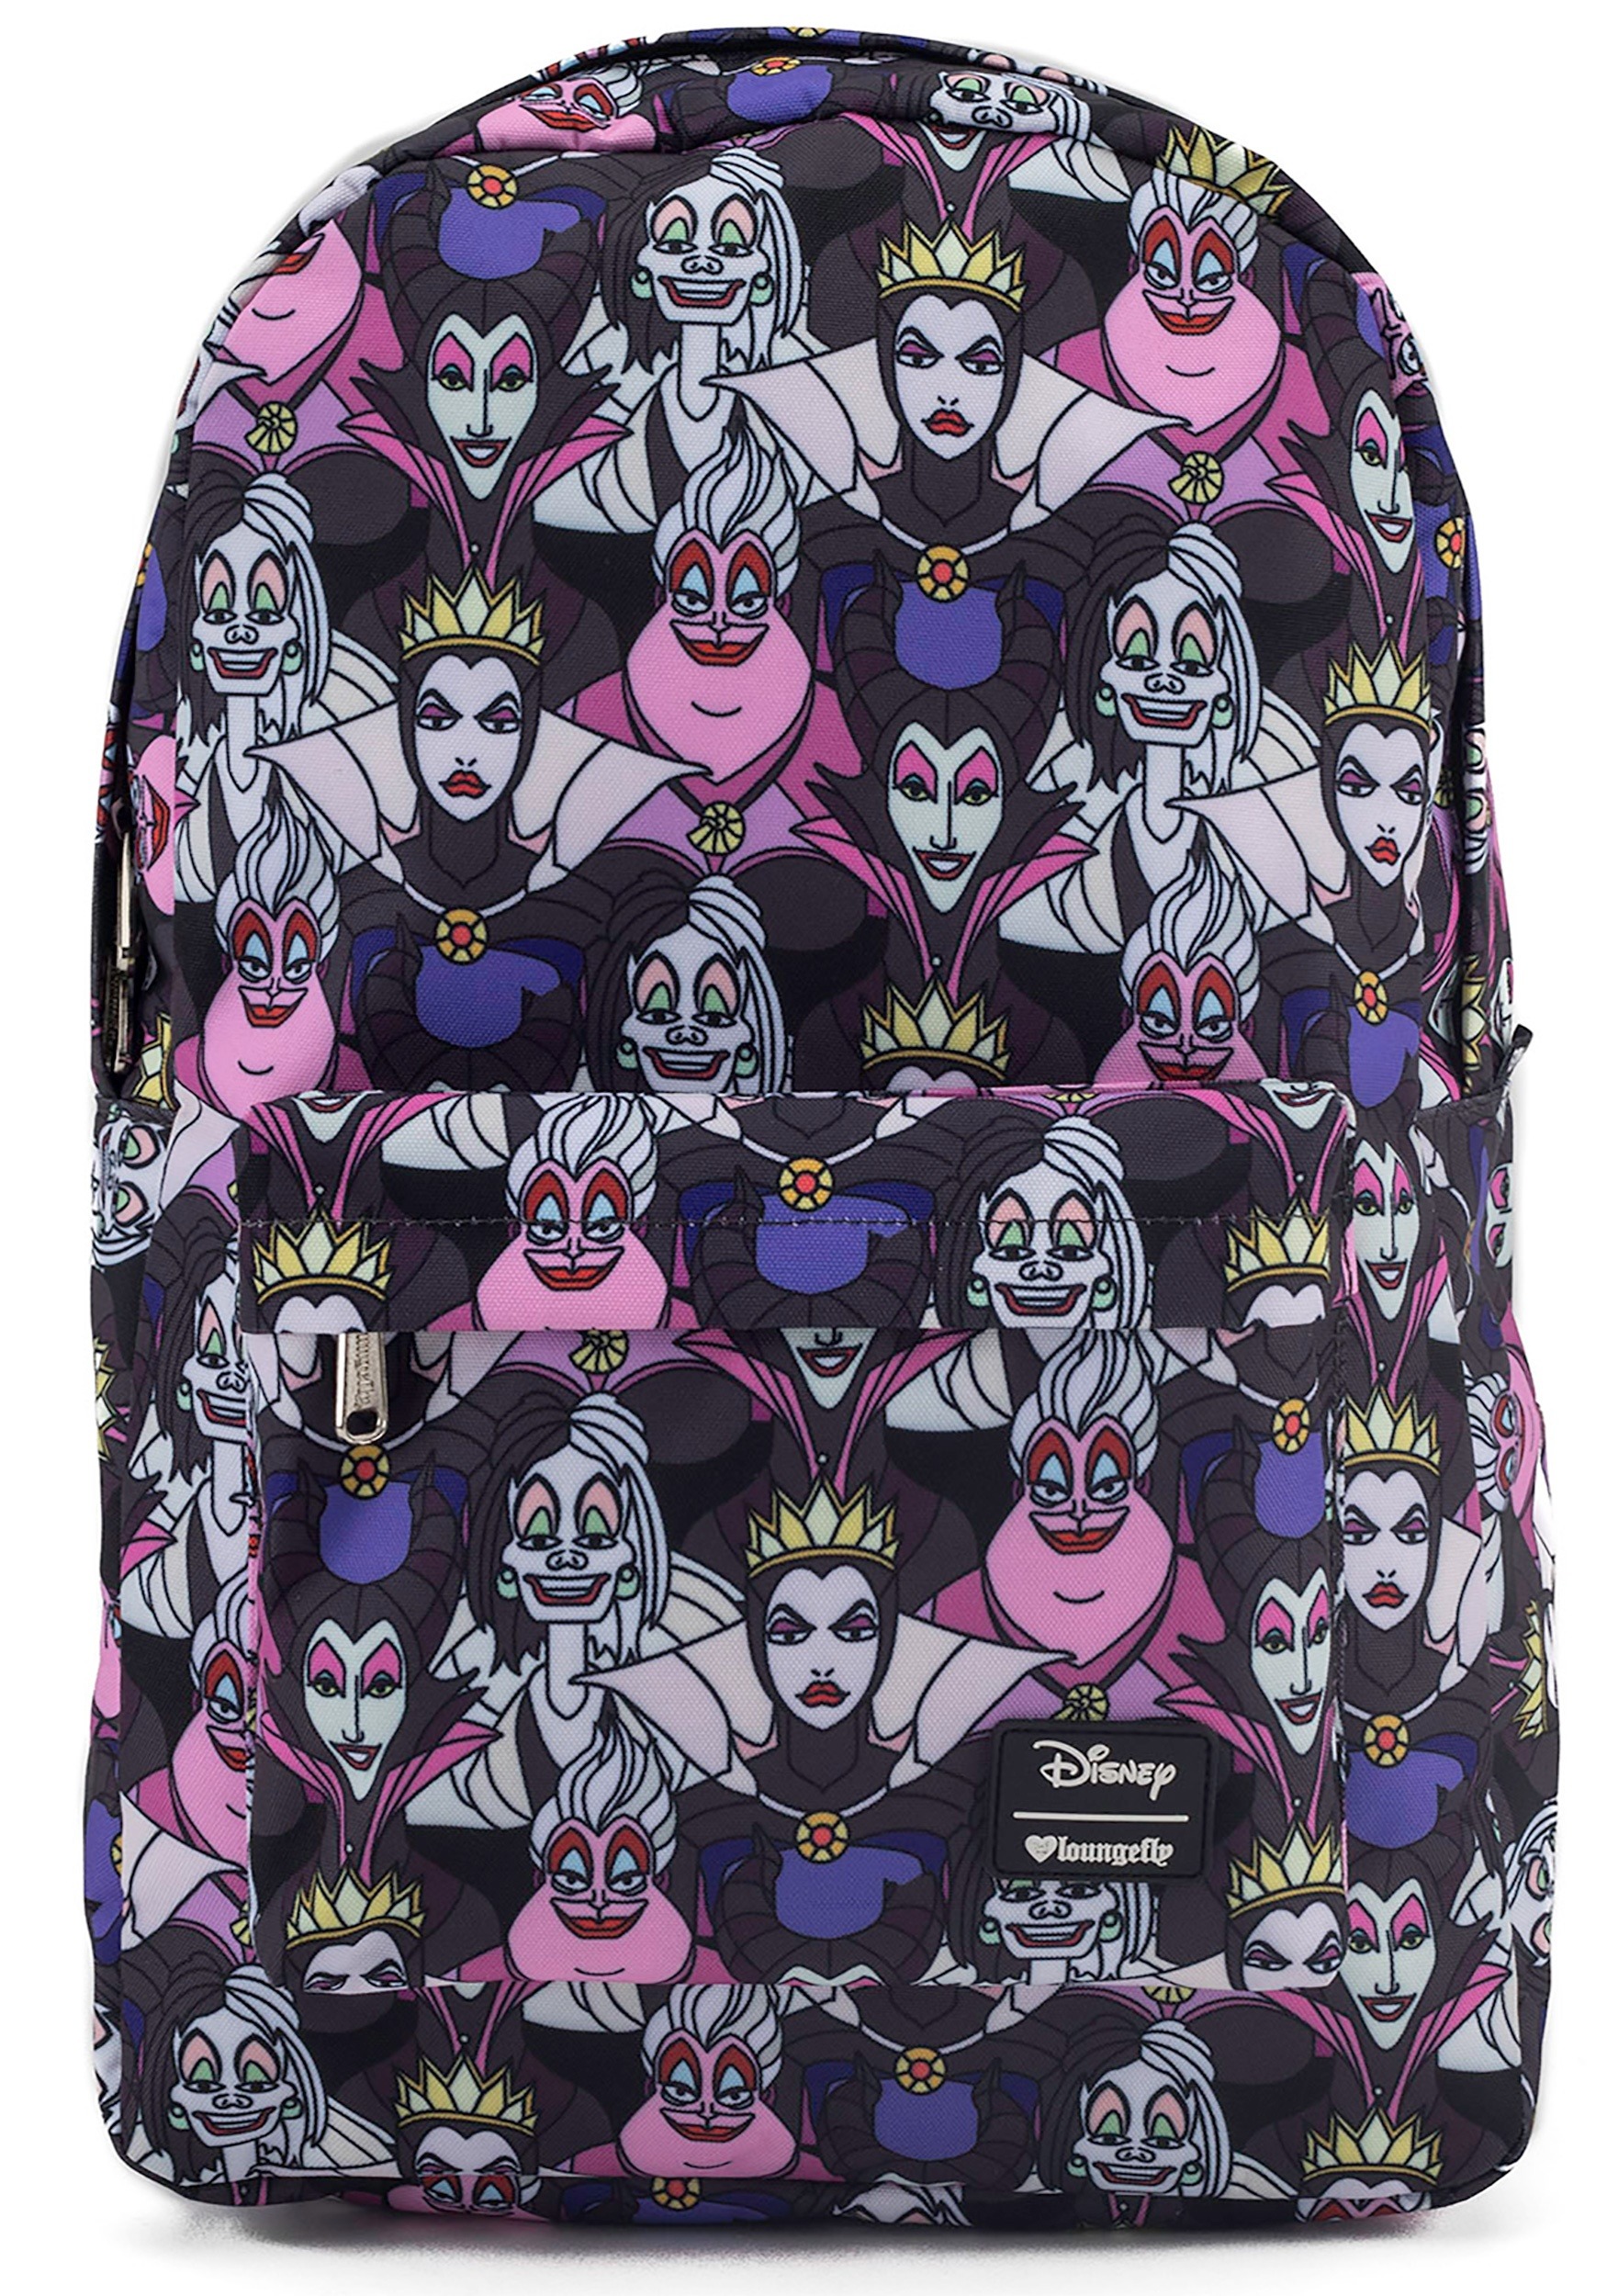 Loungefly Disney Villains All Over Print Backpack